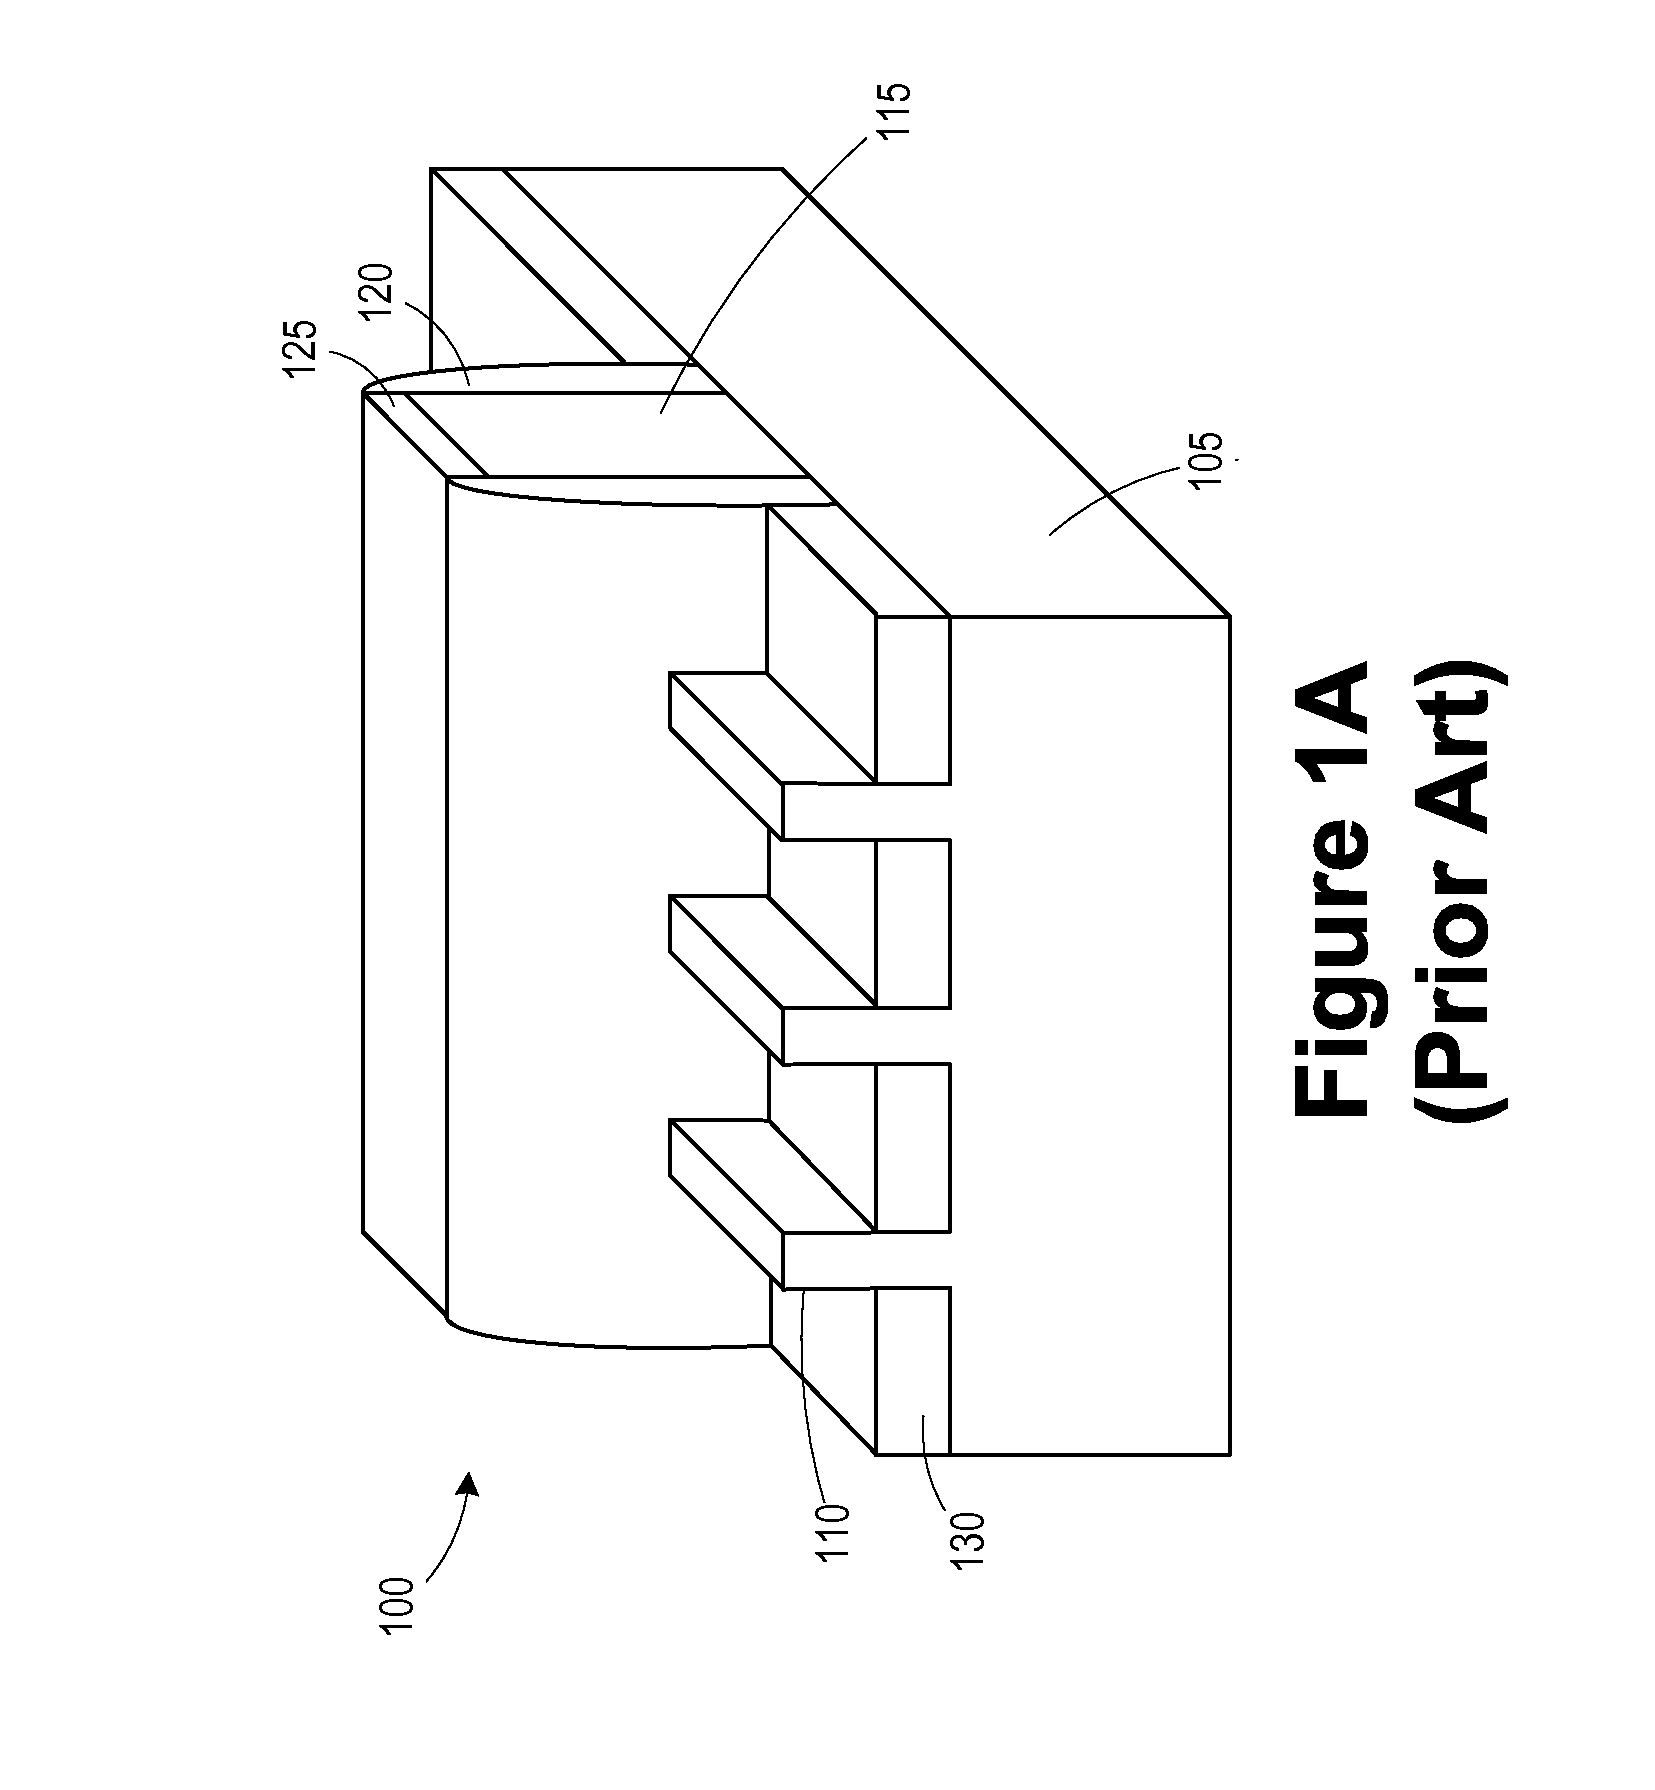 Method for forming single diffusion breaks between finfet devices and the resulting devices